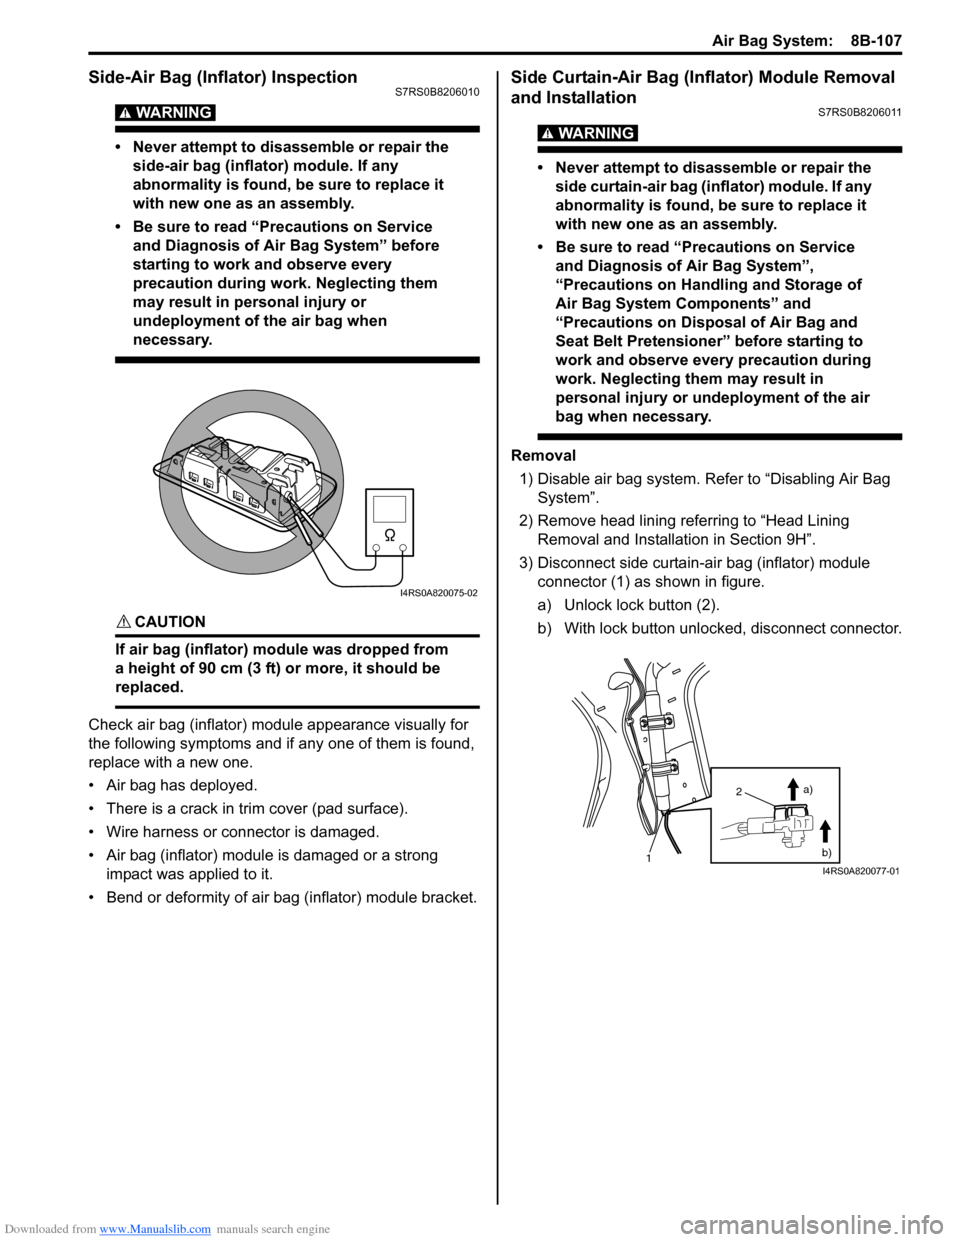 SUZUKI SWIFT 2007 2.G Service Workshop Manual Downloaded from www.Manualslib.com manuals search engine Air Bag System:  8B-107
Side-Air Bag (Inflator) InspectionS7RS0B8206010
WARNING! 
• Never attempt to disassemble or repair the side-air bag (